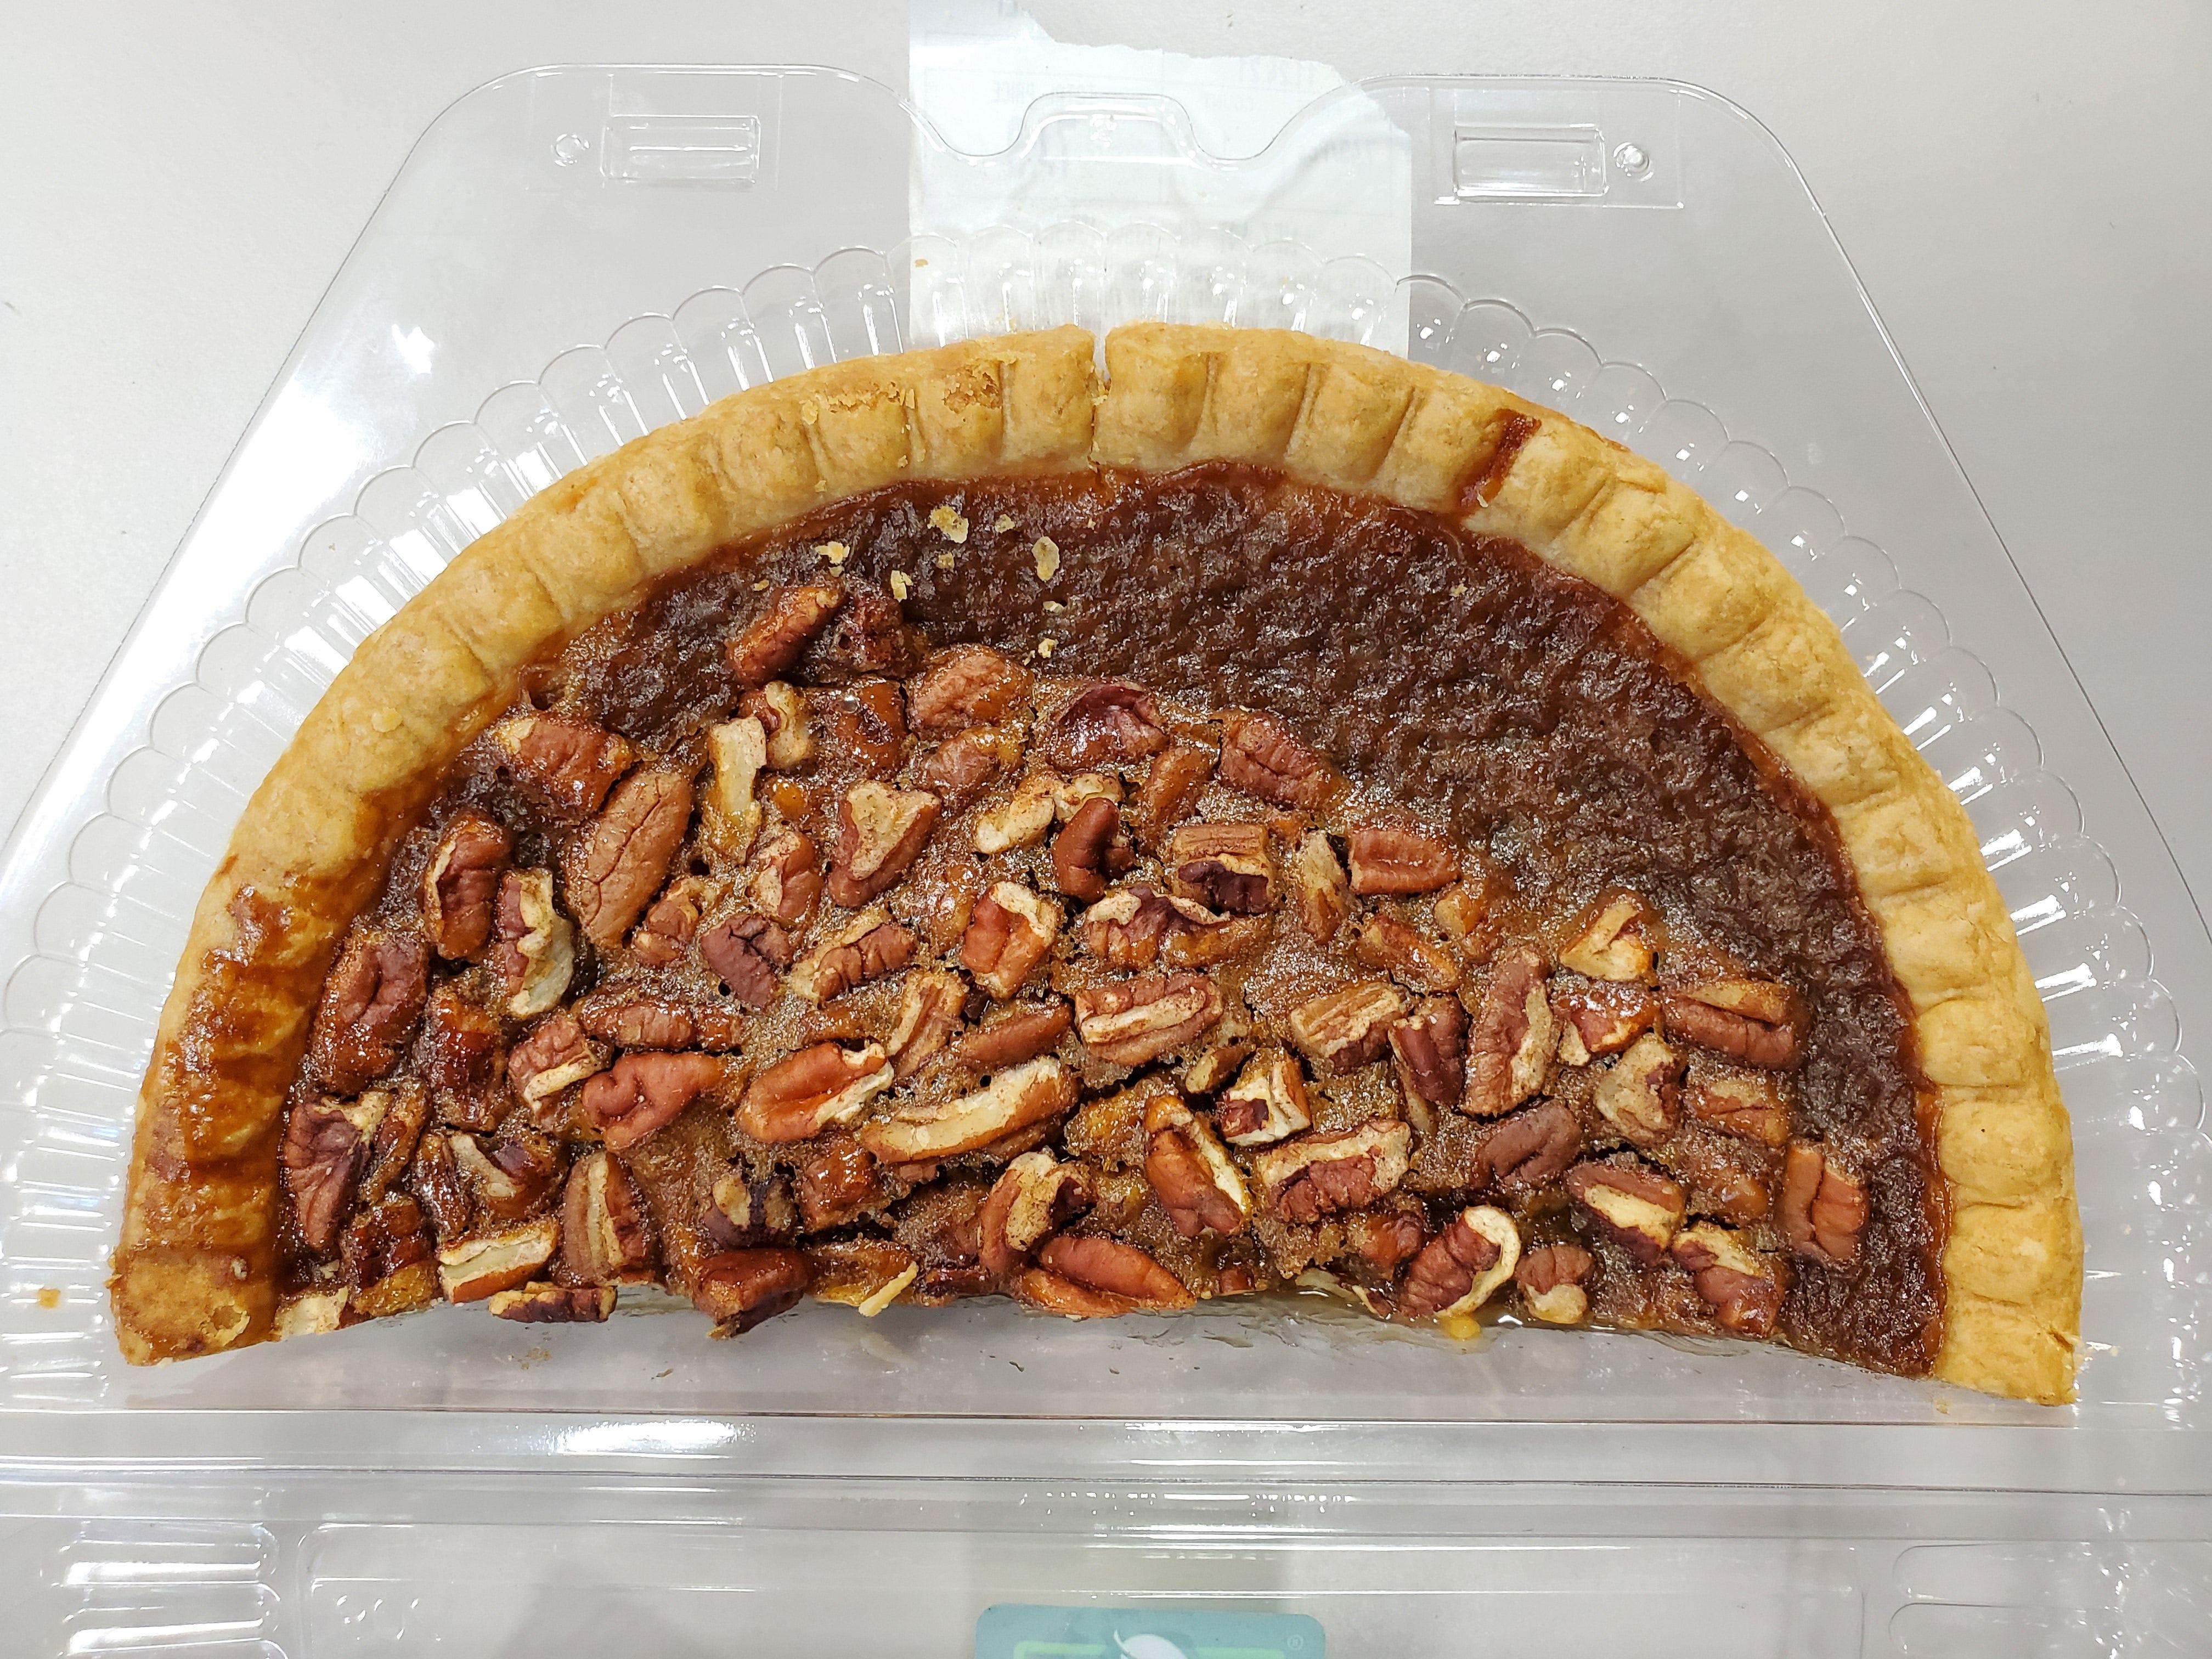 Pecan pie from The Fresh Market. $7.49 for a 13-ounce half pie.